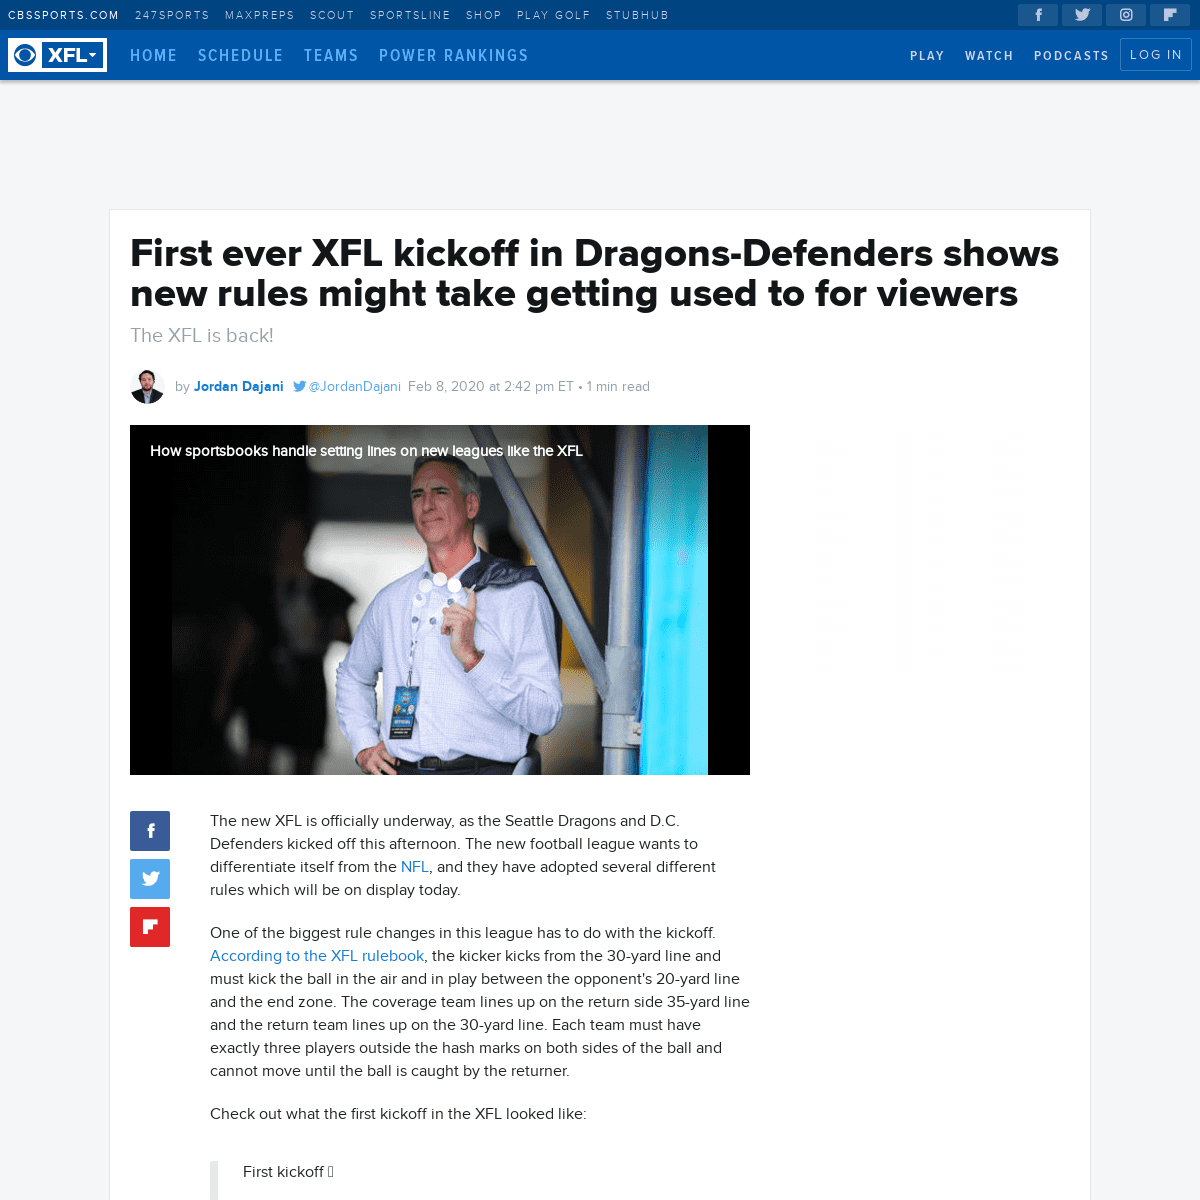 A complete backup of www.cbssports.com/xfl/news/first-ever-xfl-kickoff-in-dragons-defenders-shows-new-rules-might-take-getting-u